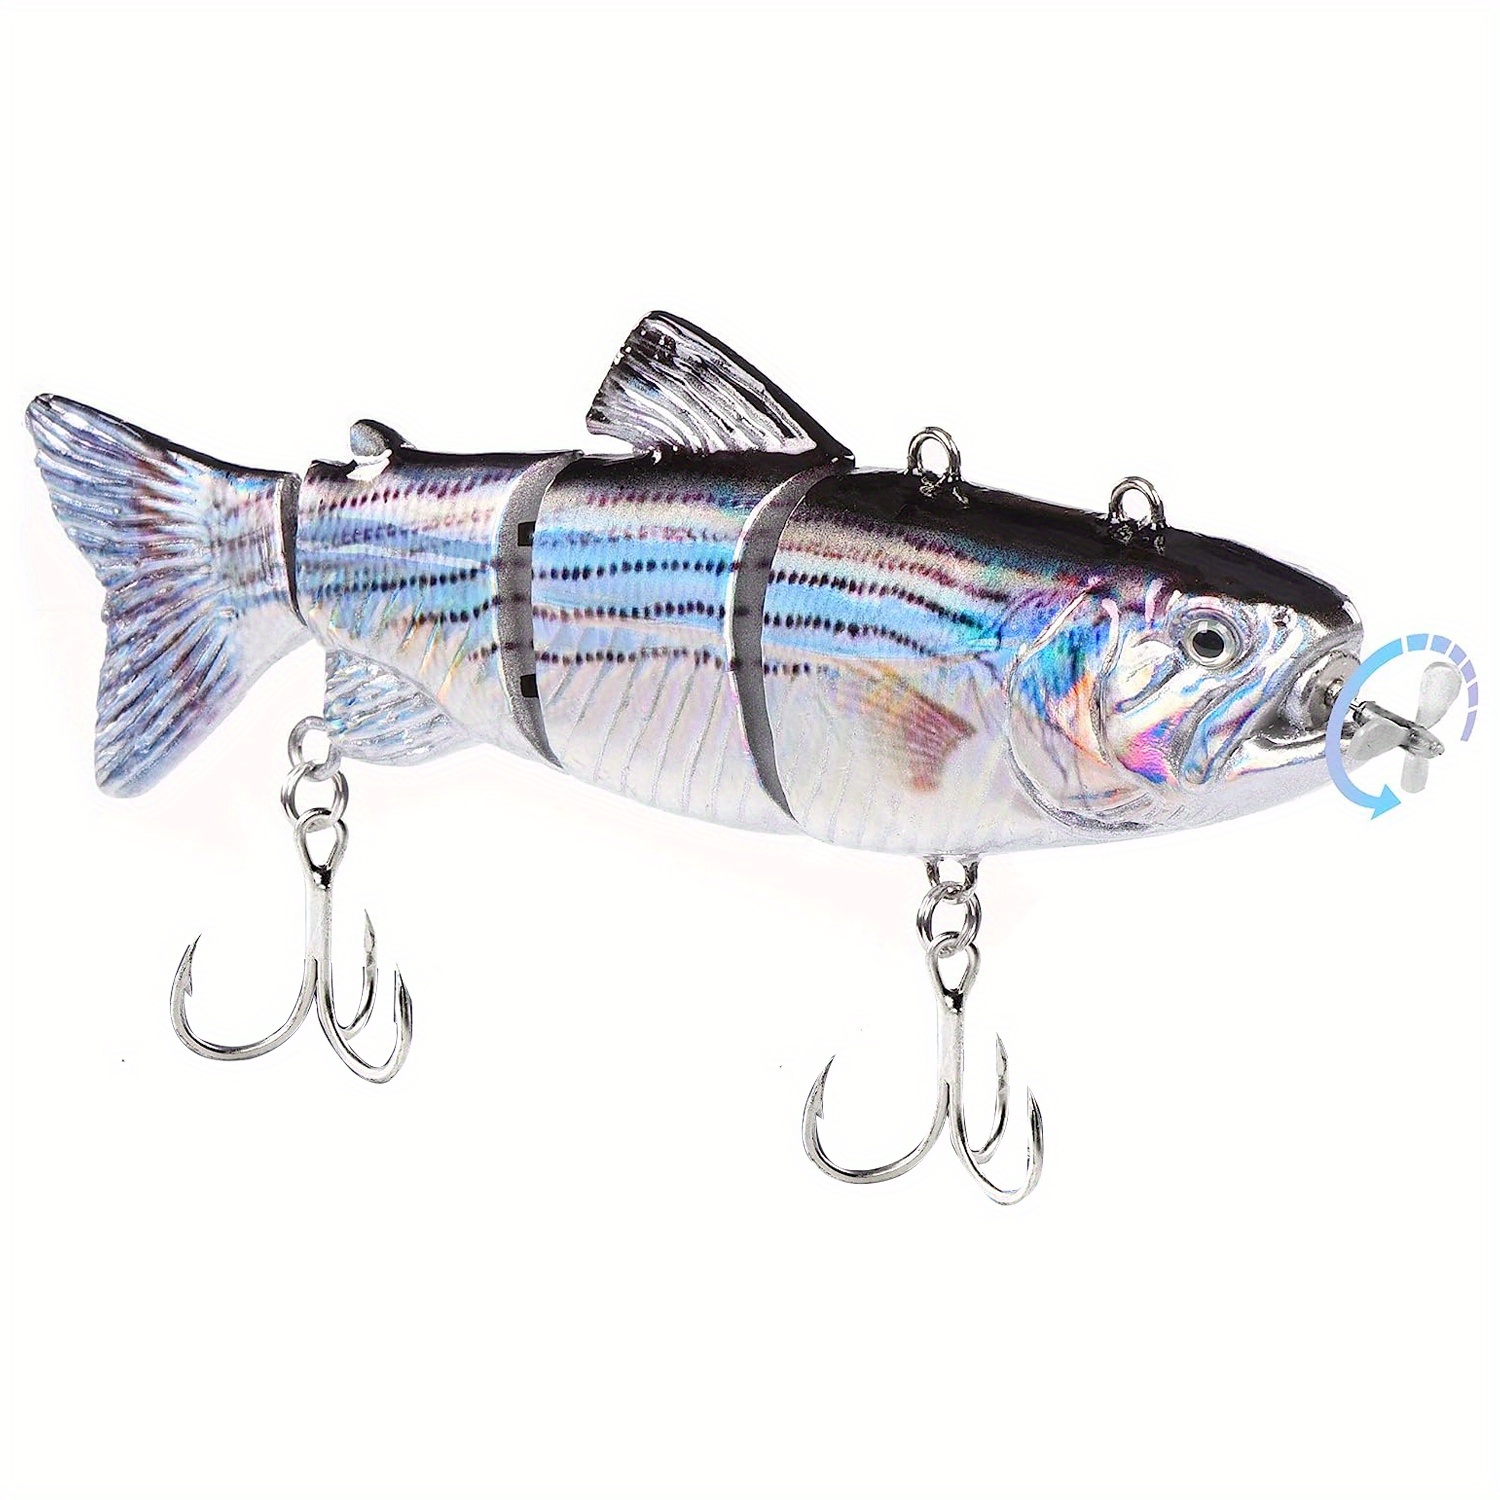 Electric Lure Wobblers For Fishing 4 Segement Swimbait Rechargeable Lure  Crankbait Flashing LED Light Robotic Fishing Lure 231225 From 9,94 €